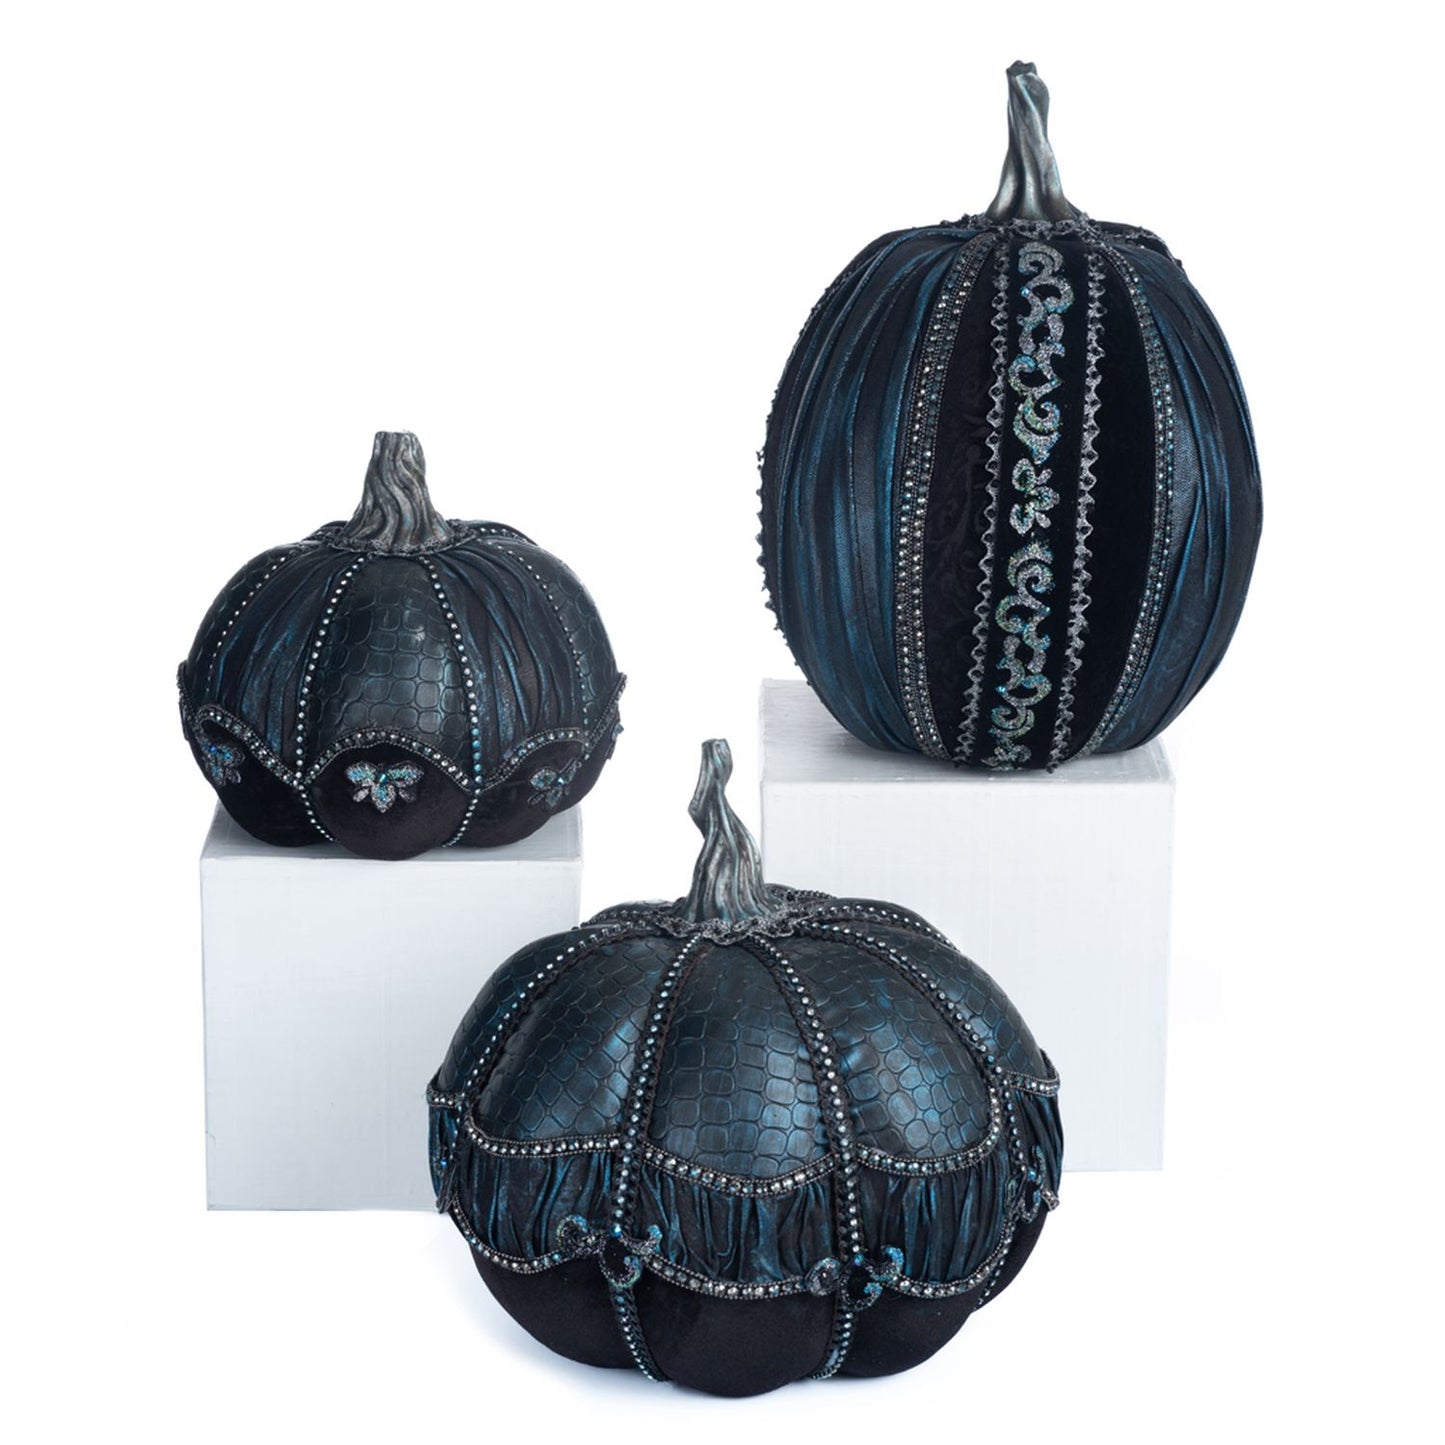 Katherine's Collection 2023 Seers and Takers 13" Fabric Pumpkins Set of 3, Black